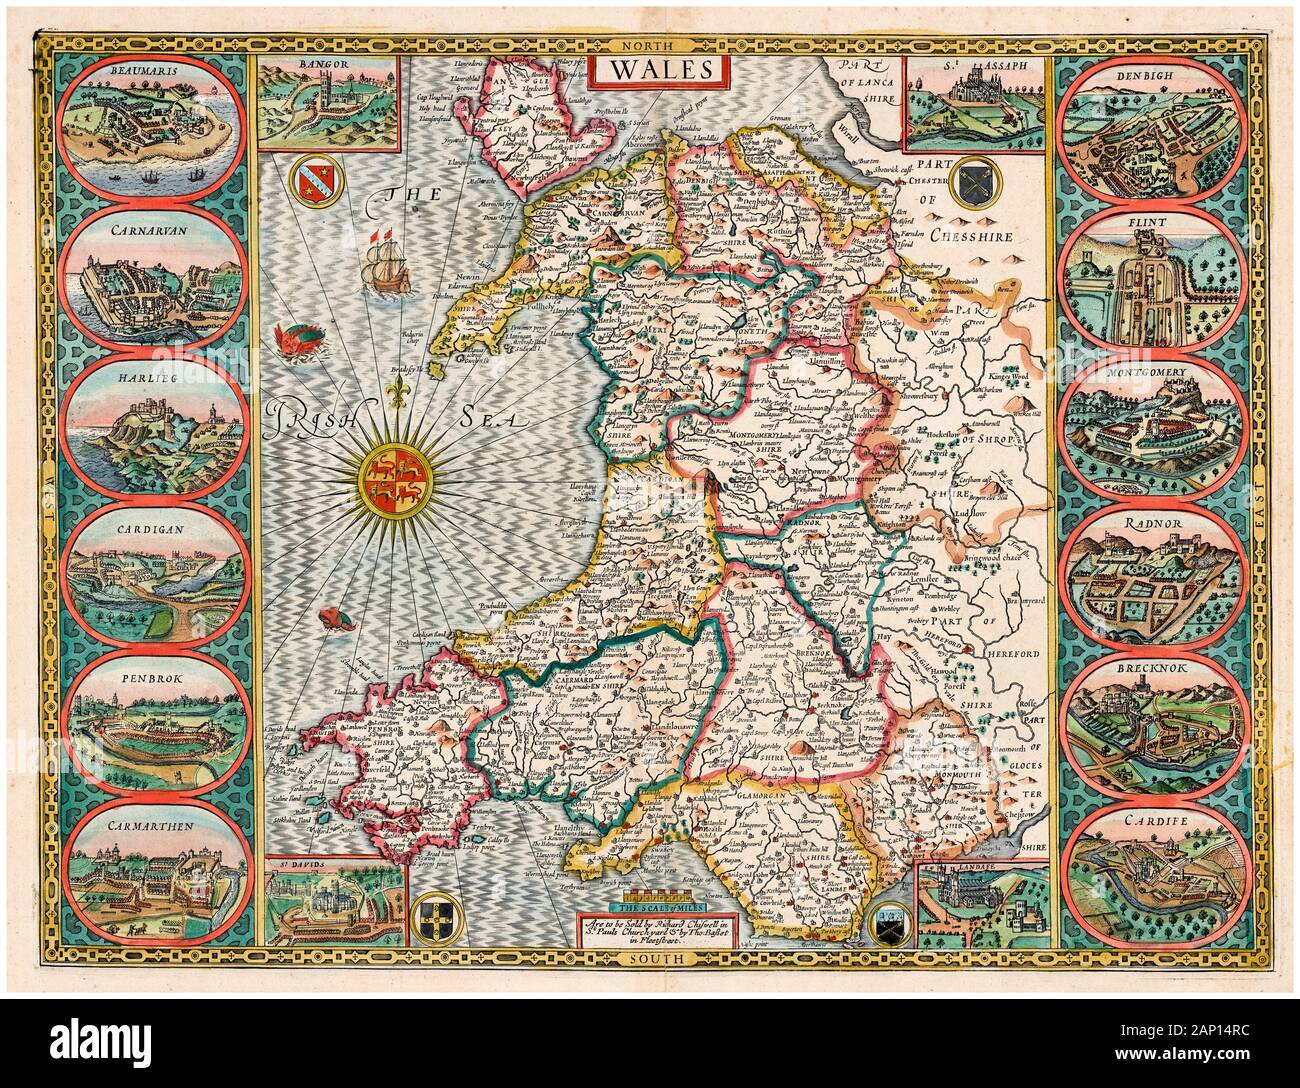 Old vintage Map of Wales, early 17th Century, illustration by John Speed, 1610 Stock Photo